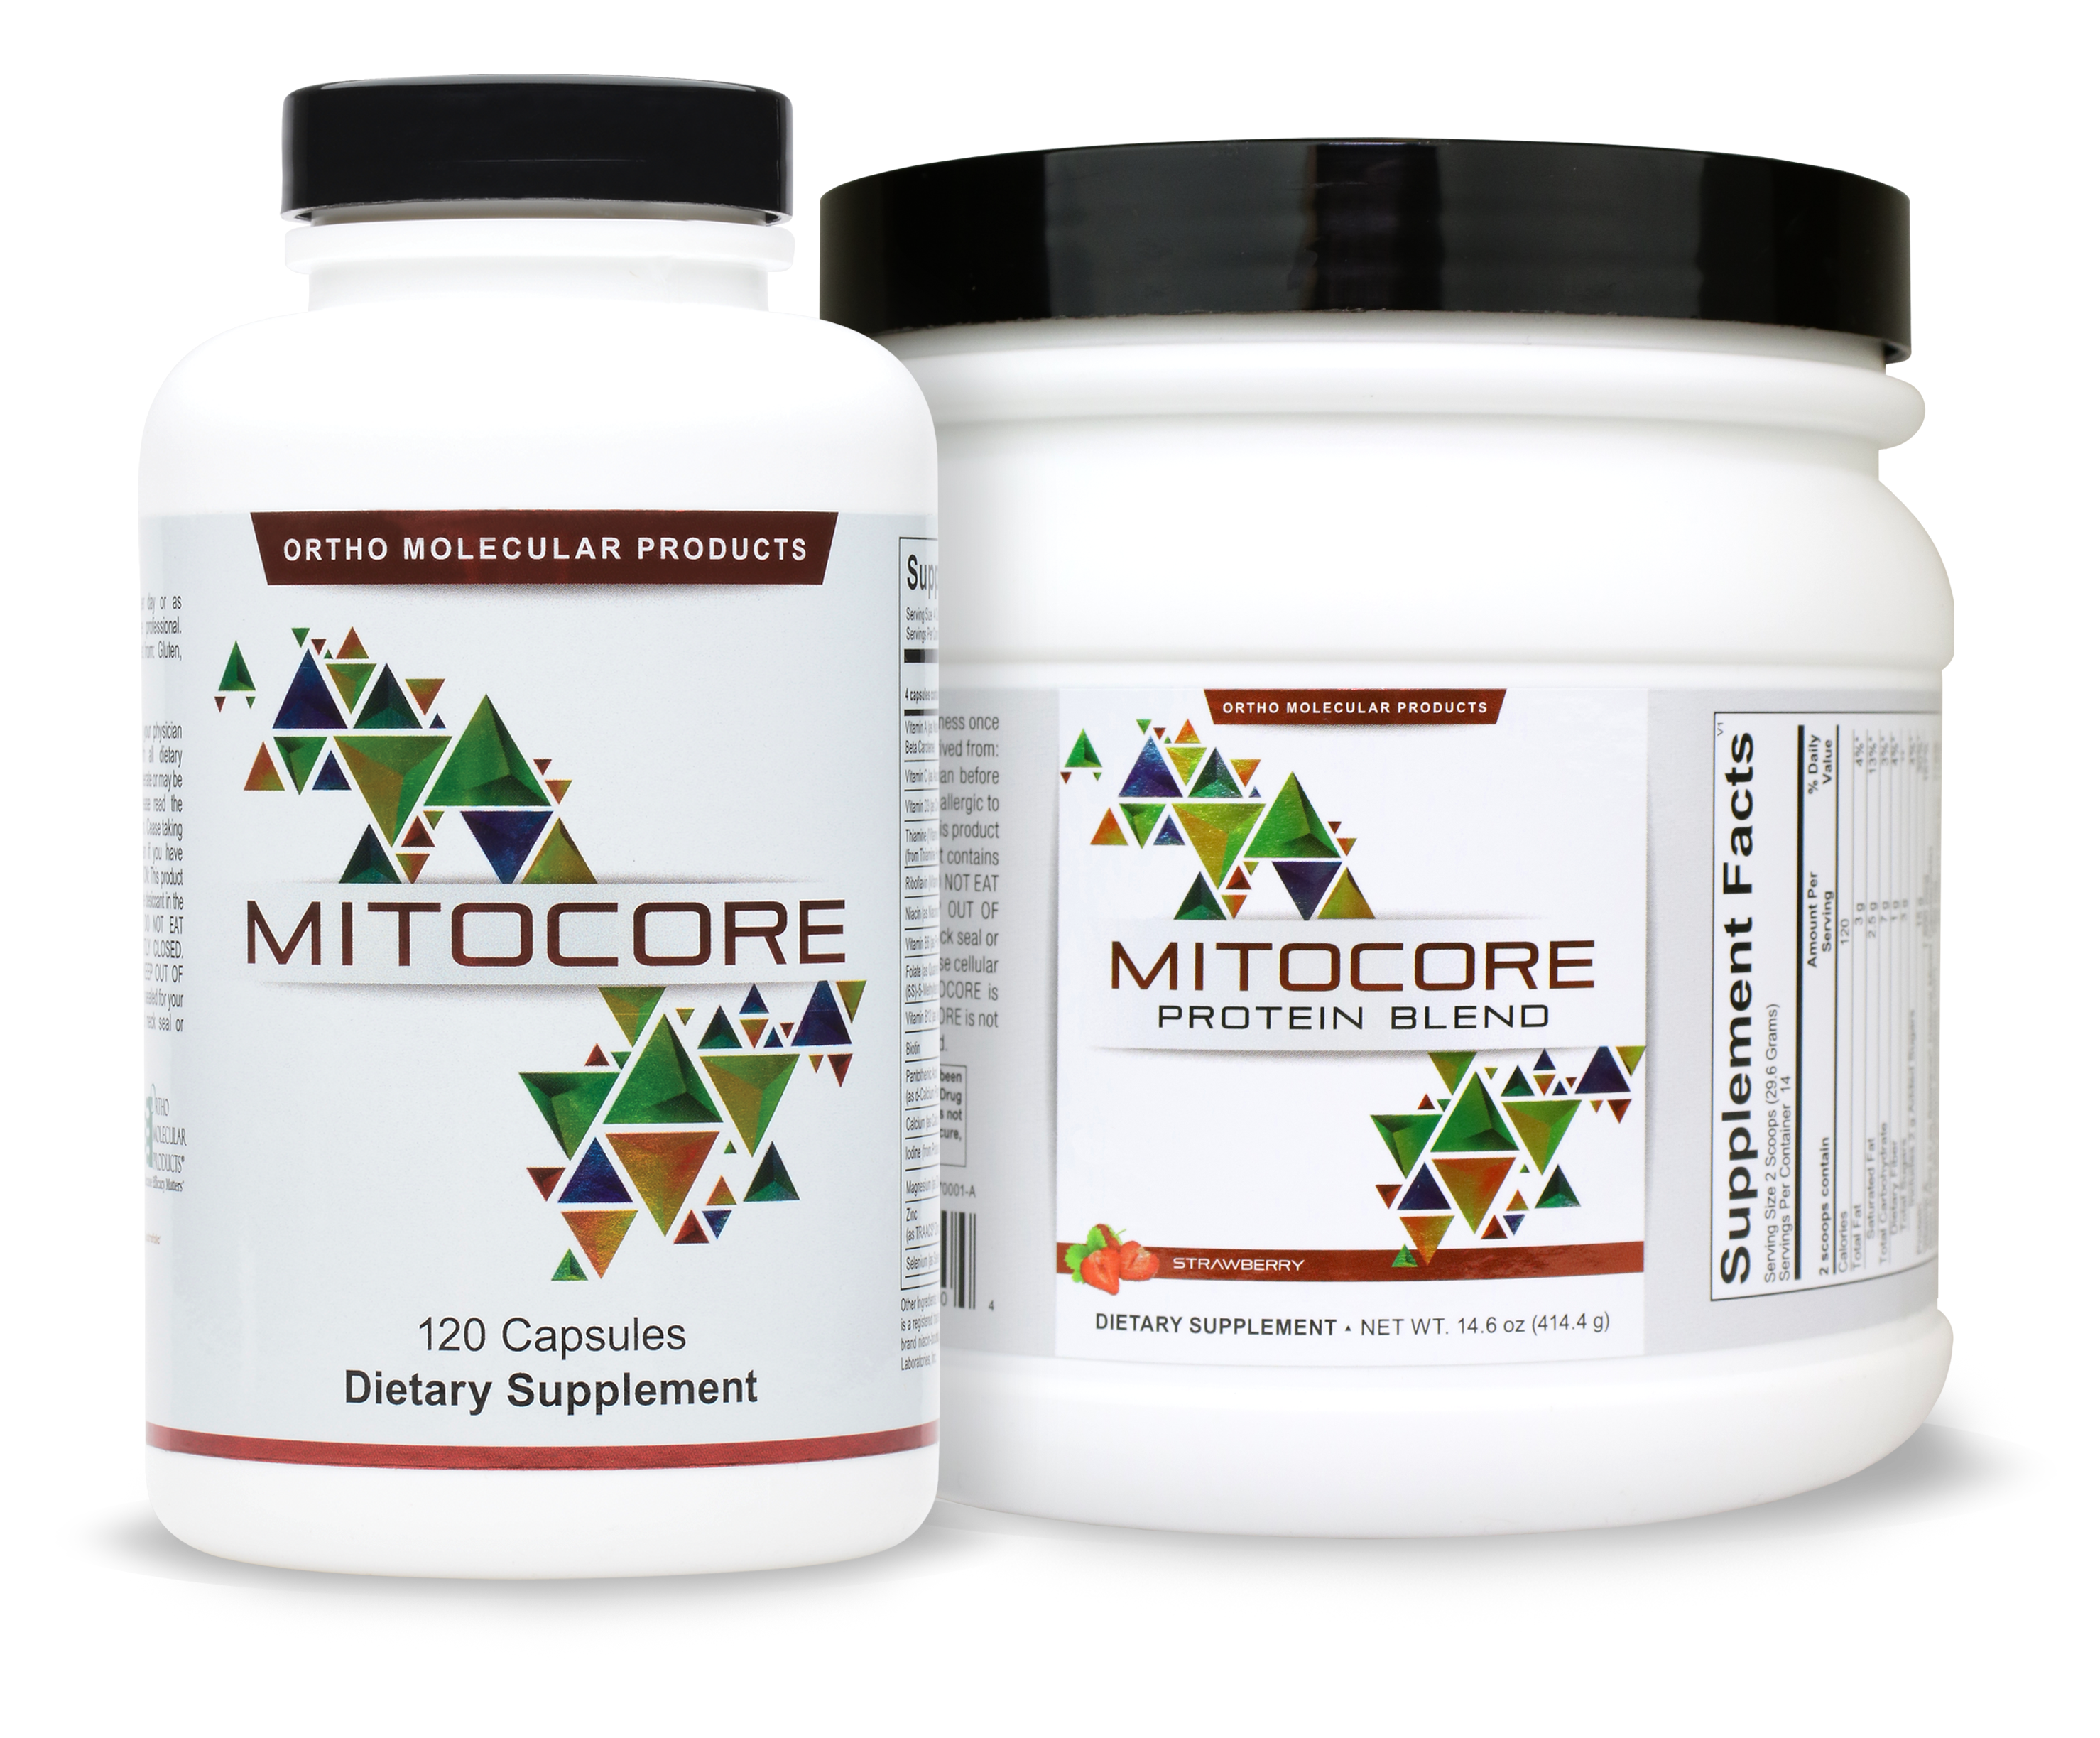 MitoCore product family